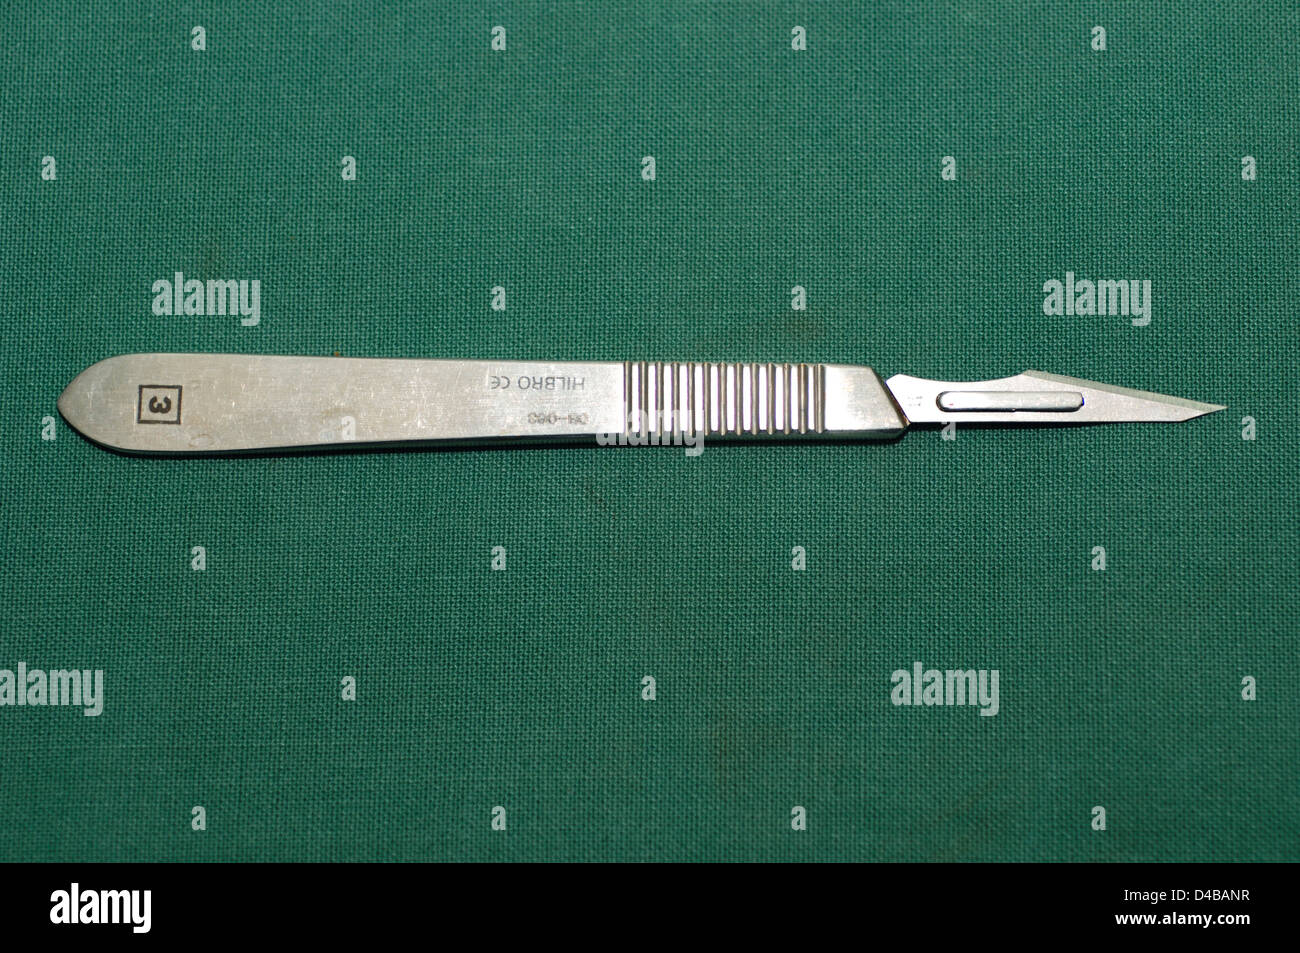 A No 3 surgical scalpel is a small but extremely sharp knife used for surgery and anatomical dissection. Stock Photo